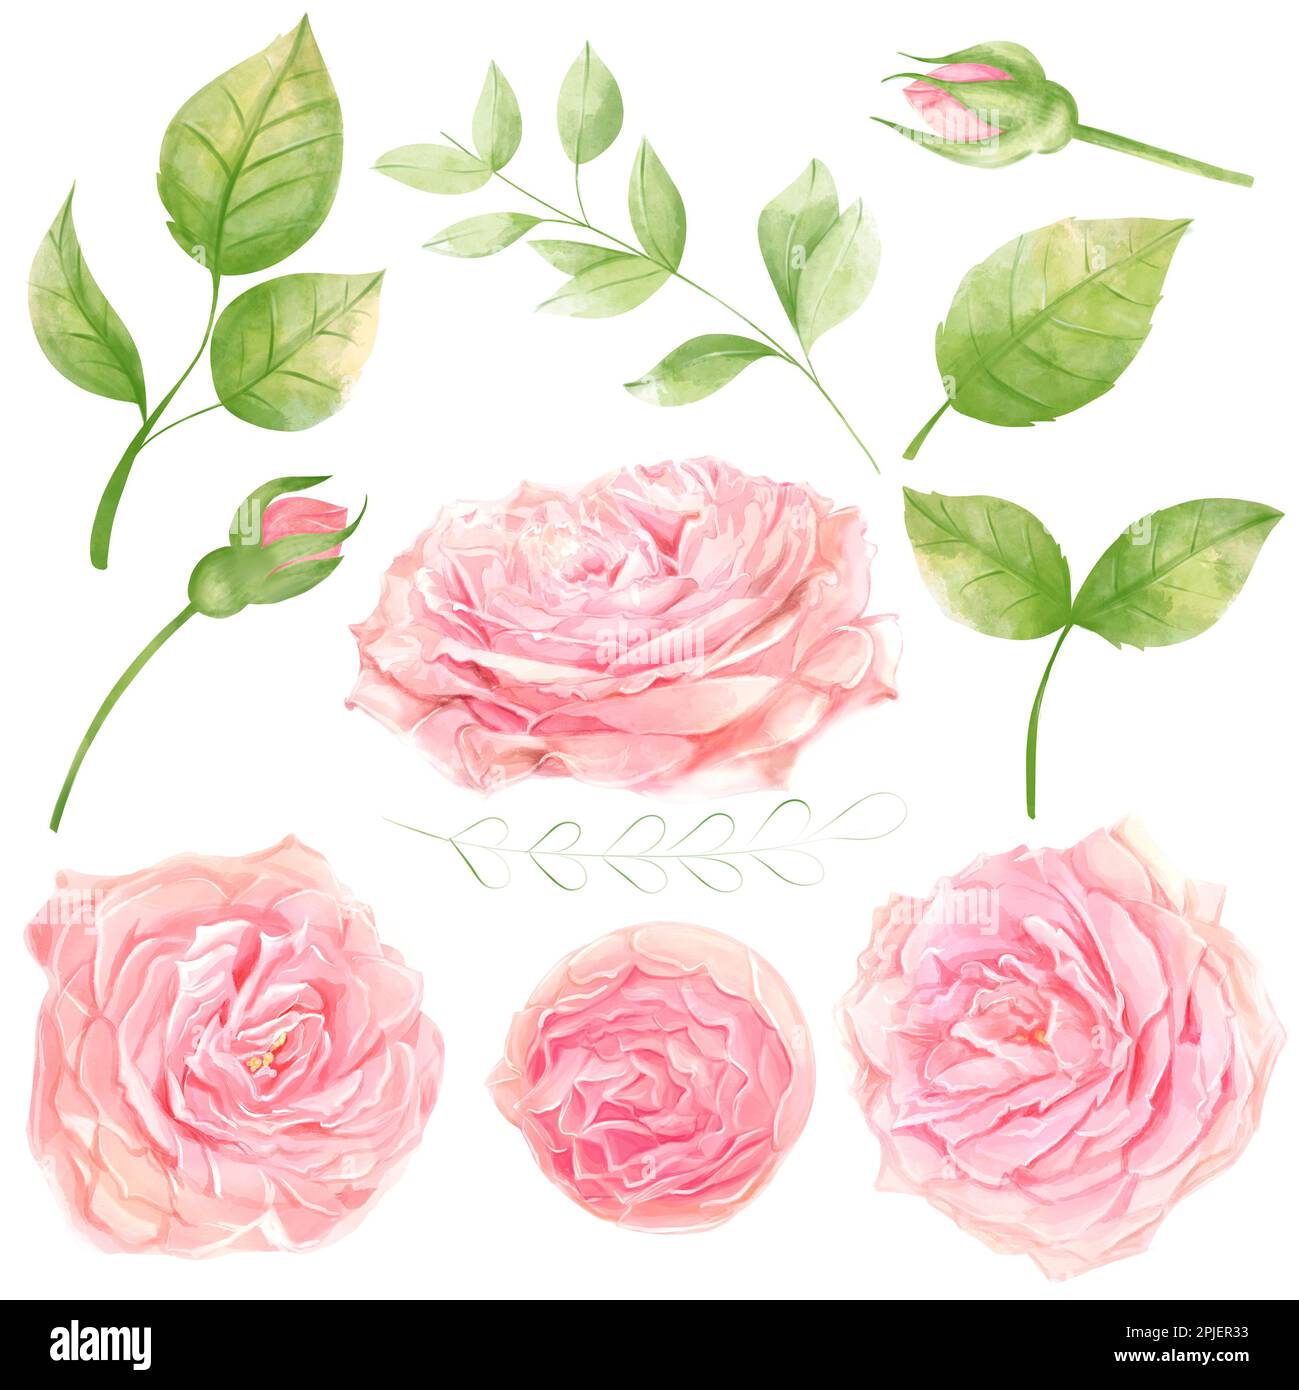 Roses Watercolor Romanic Clipart Leaf isolations for design Stock Photo